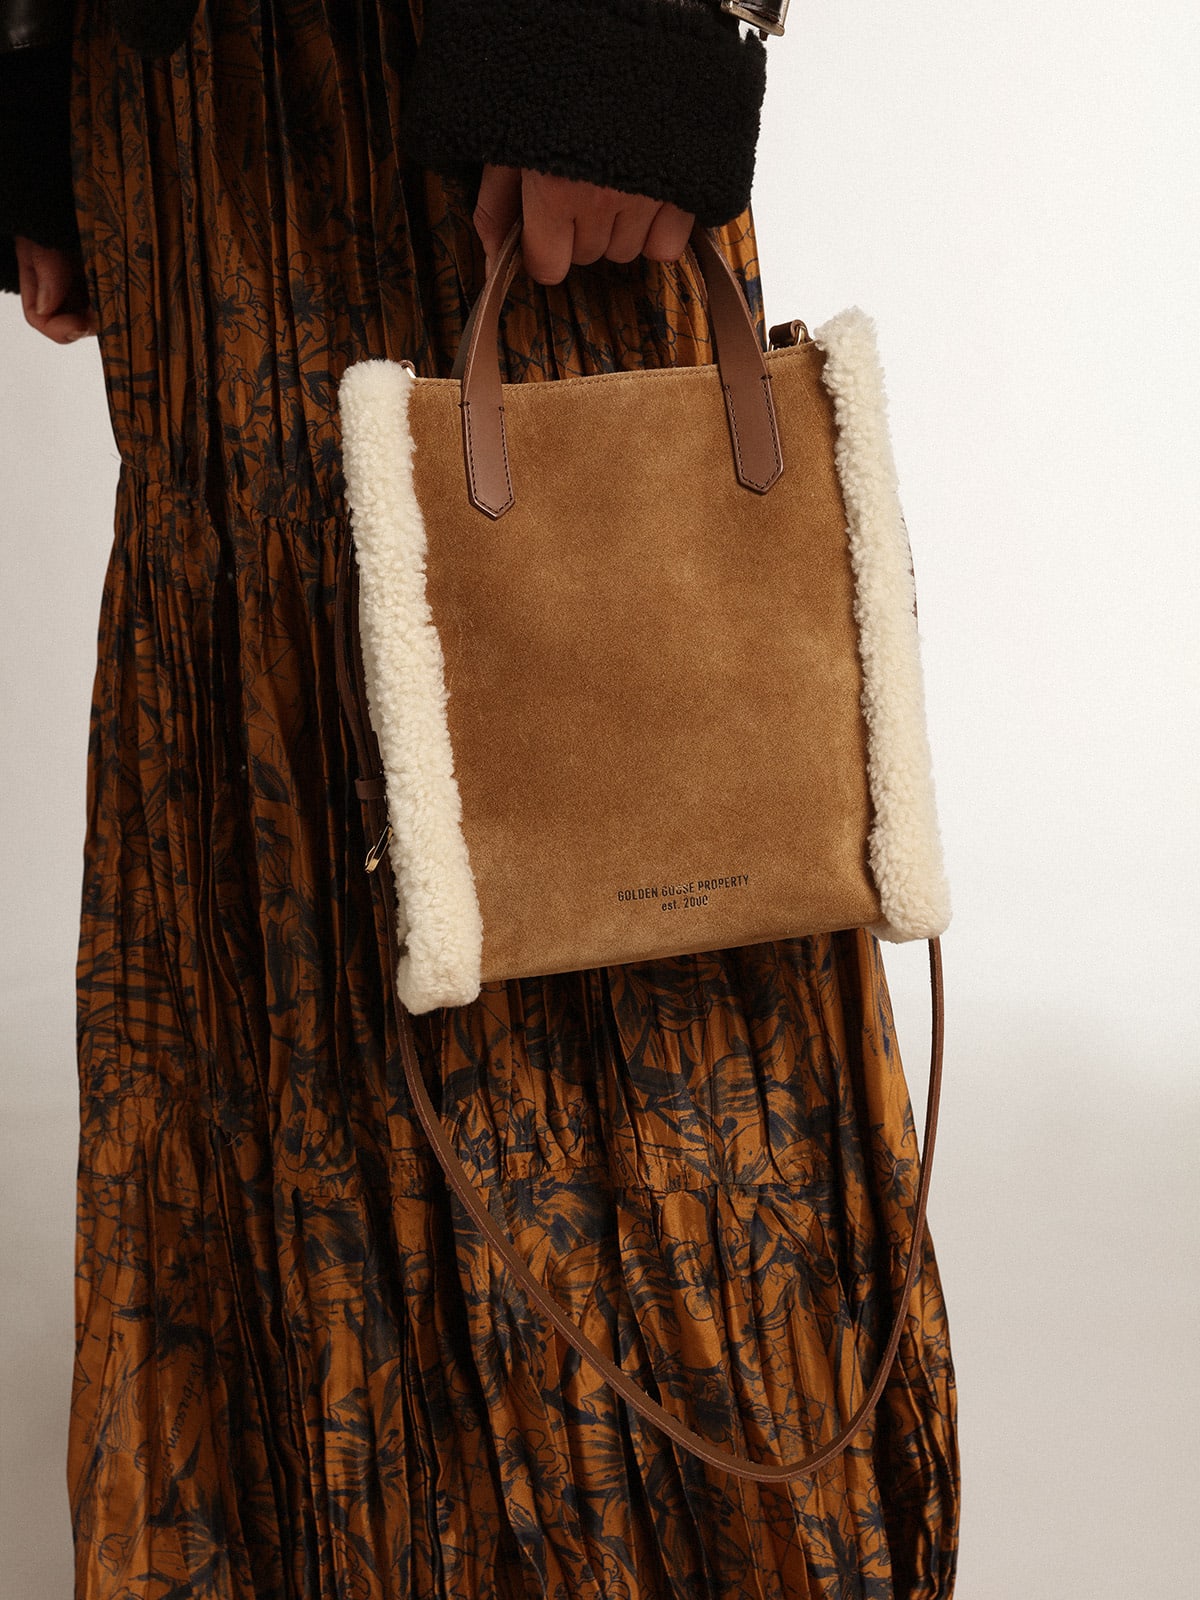 Golden Goose - Mini California Bag in suede leather with shearling trim in 